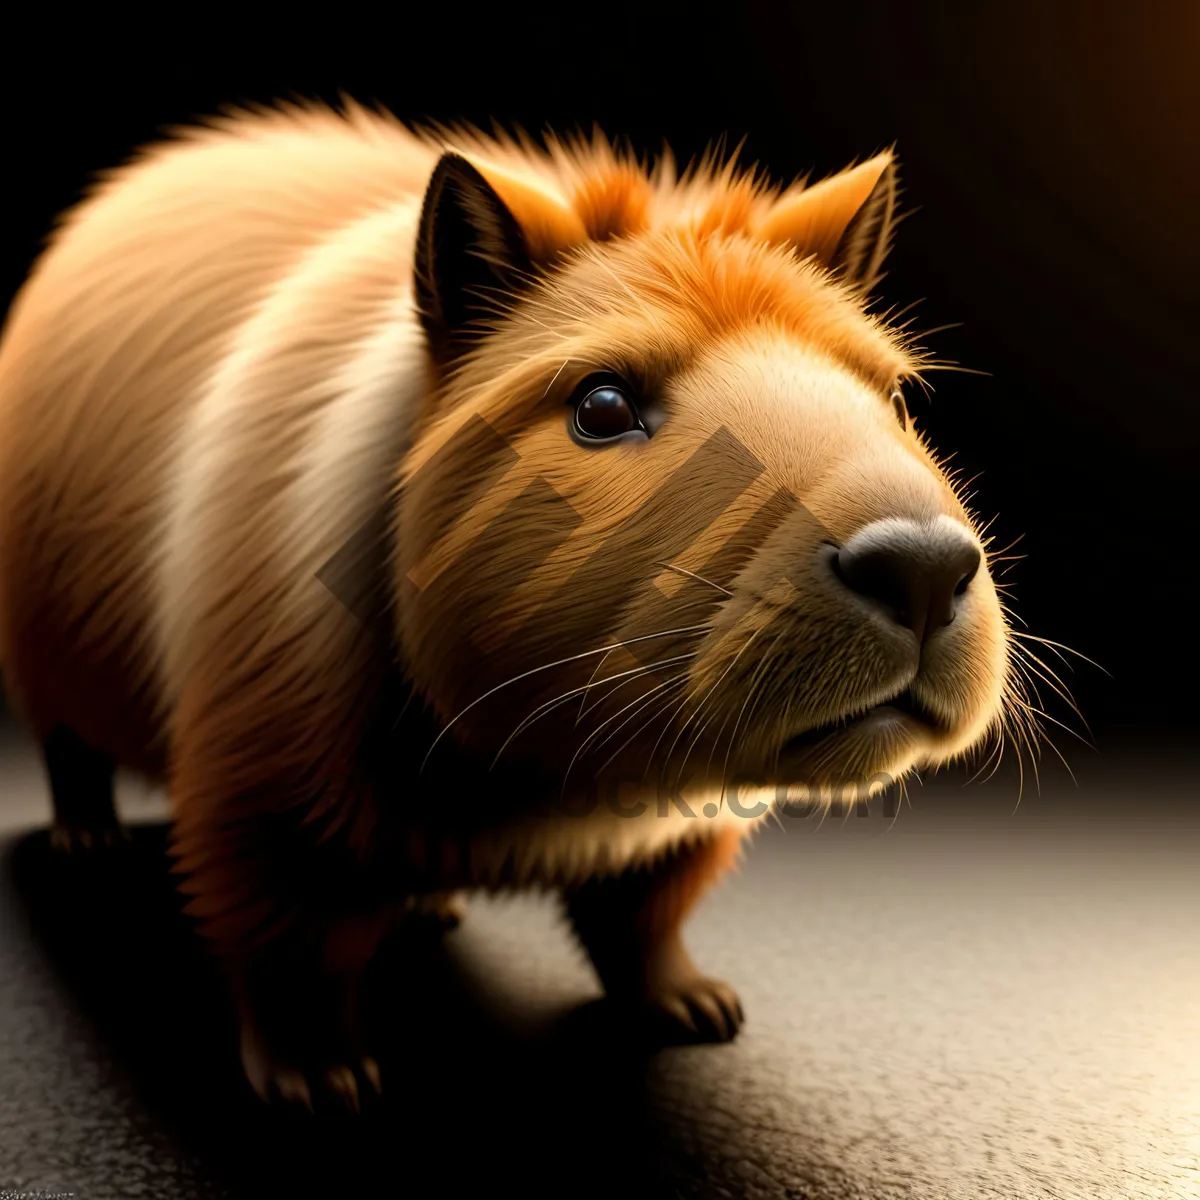 Picture of Adorable Guinea Pig with Fluffy Brown Fur